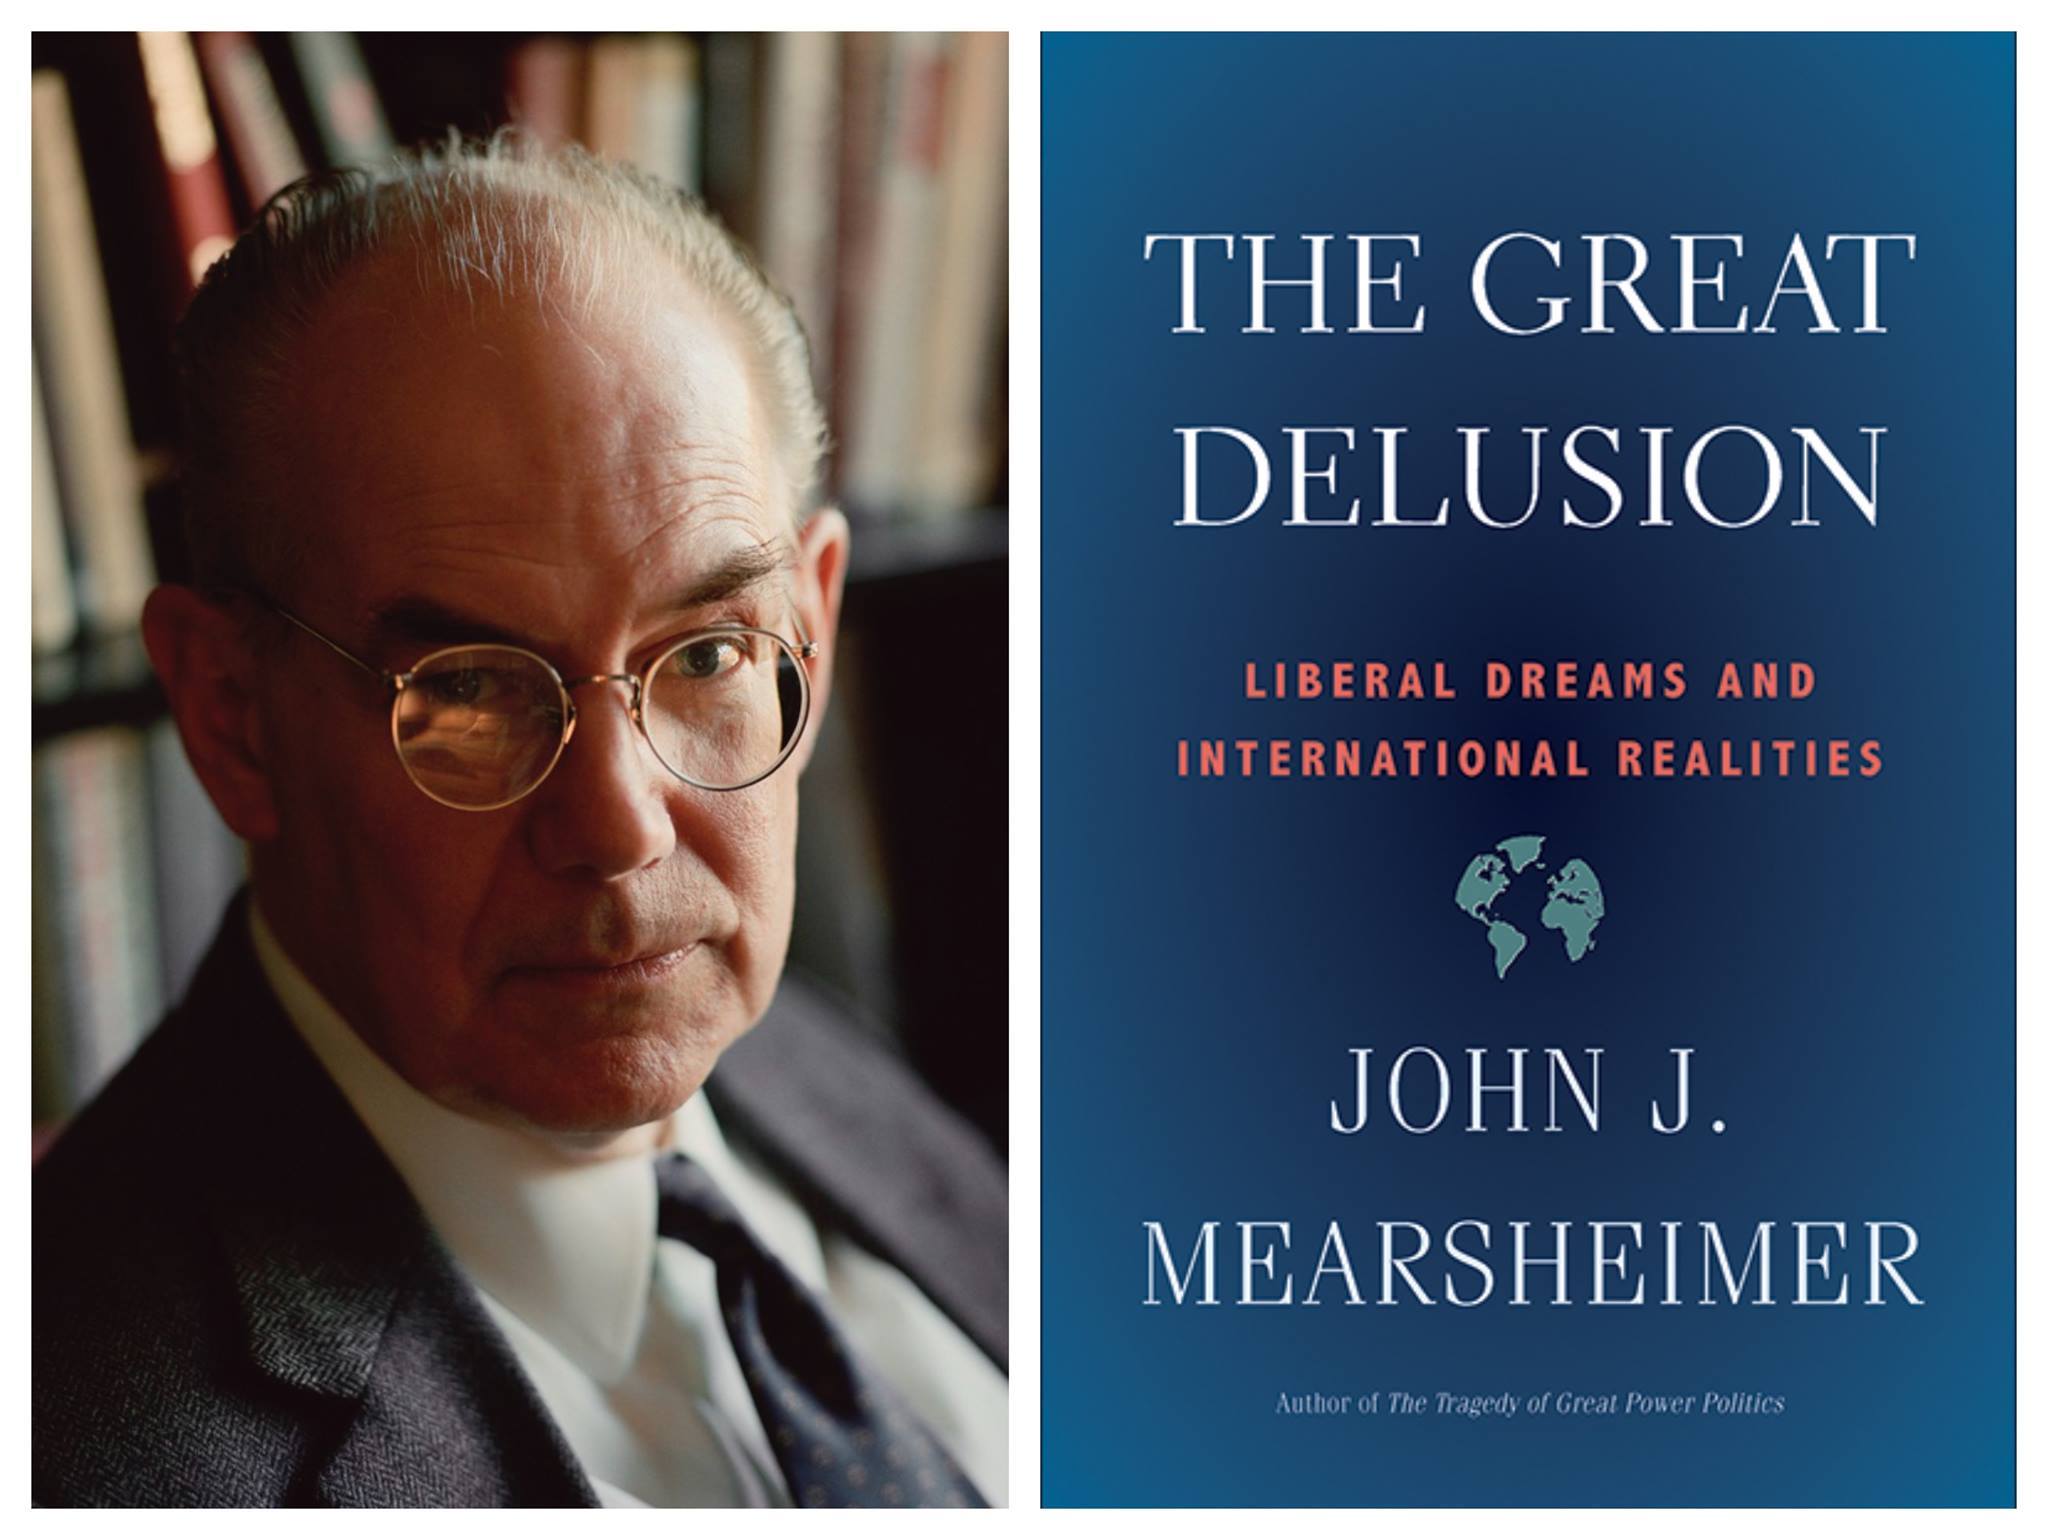 Book Review: The Great Delusion: Liberal Dreams and International Realities by John Mearsheimer